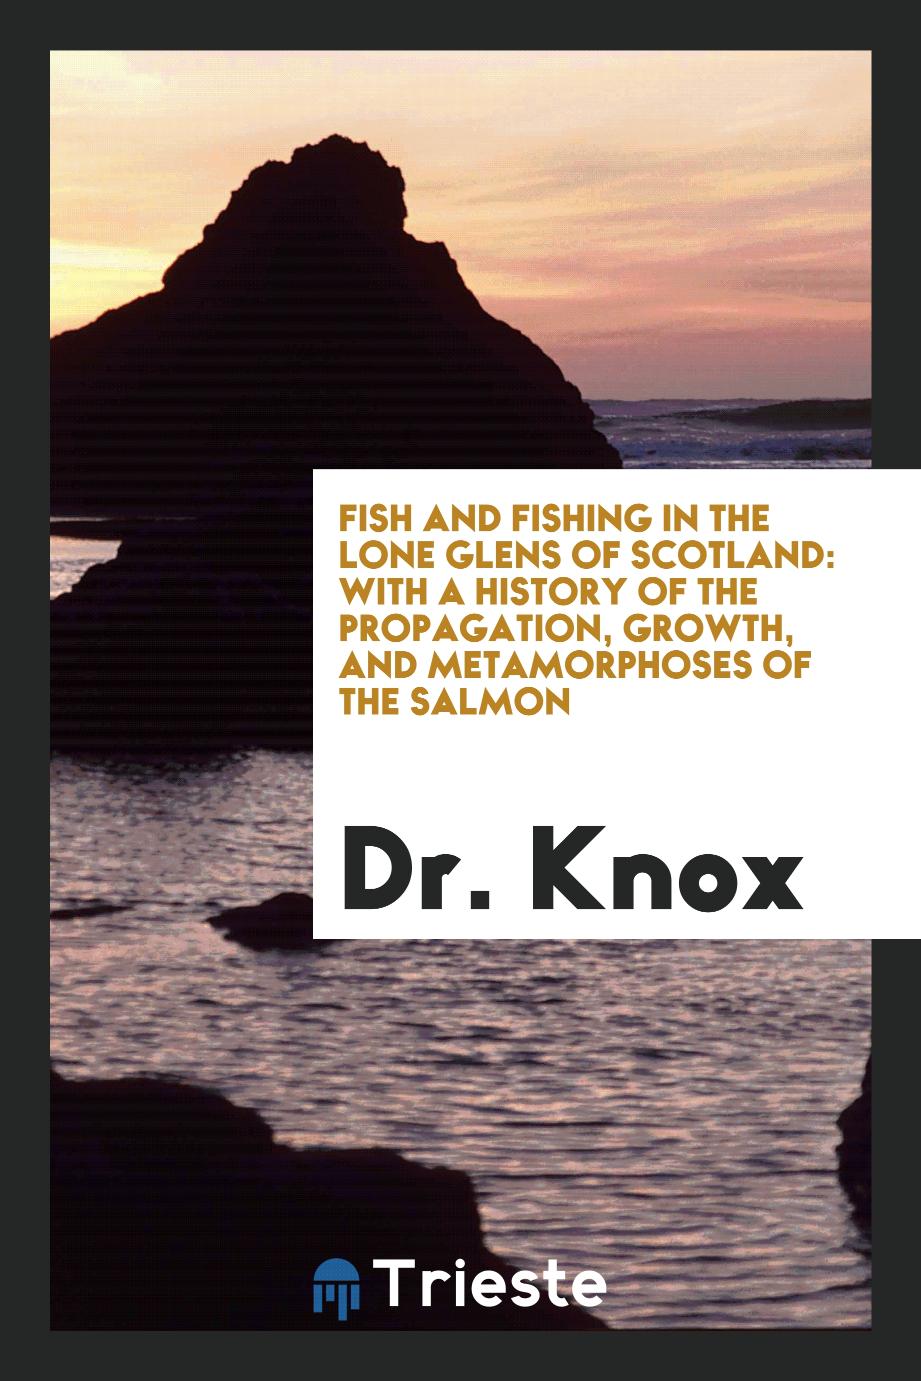 Fish and Fishing in the Lone Glens of Scotland: With a History of the Propagation, Growth, and Metamorphoses of the Salmon